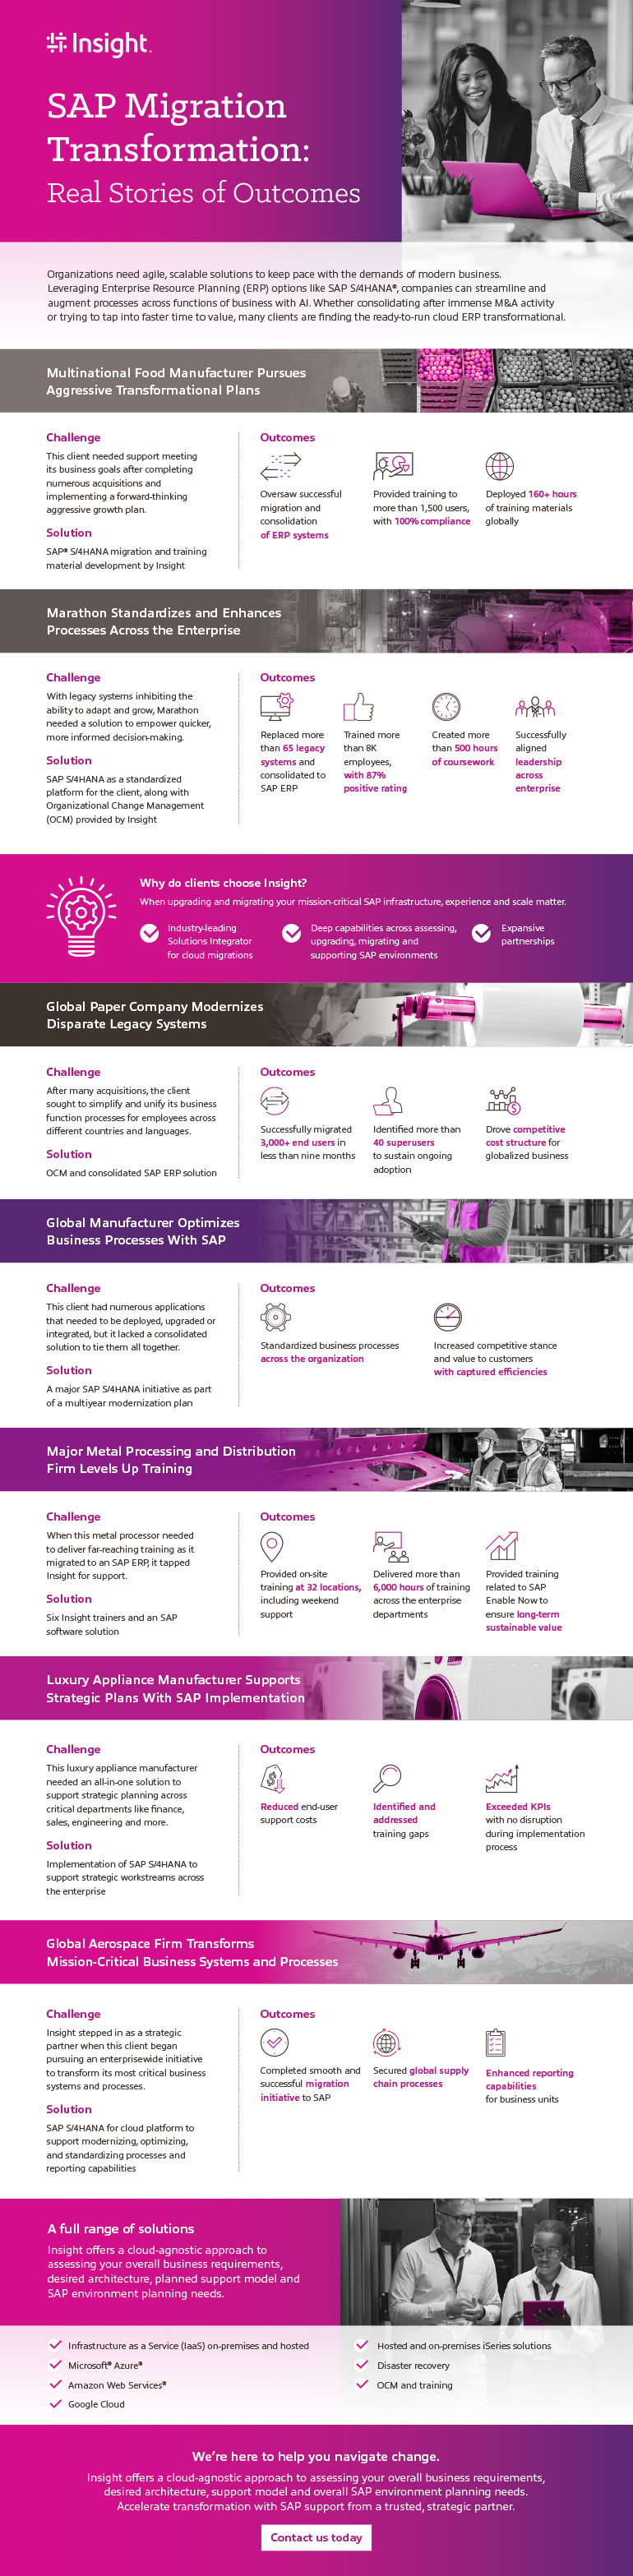 SAP Migration Transformation: Real Stories of Outcomes infographic